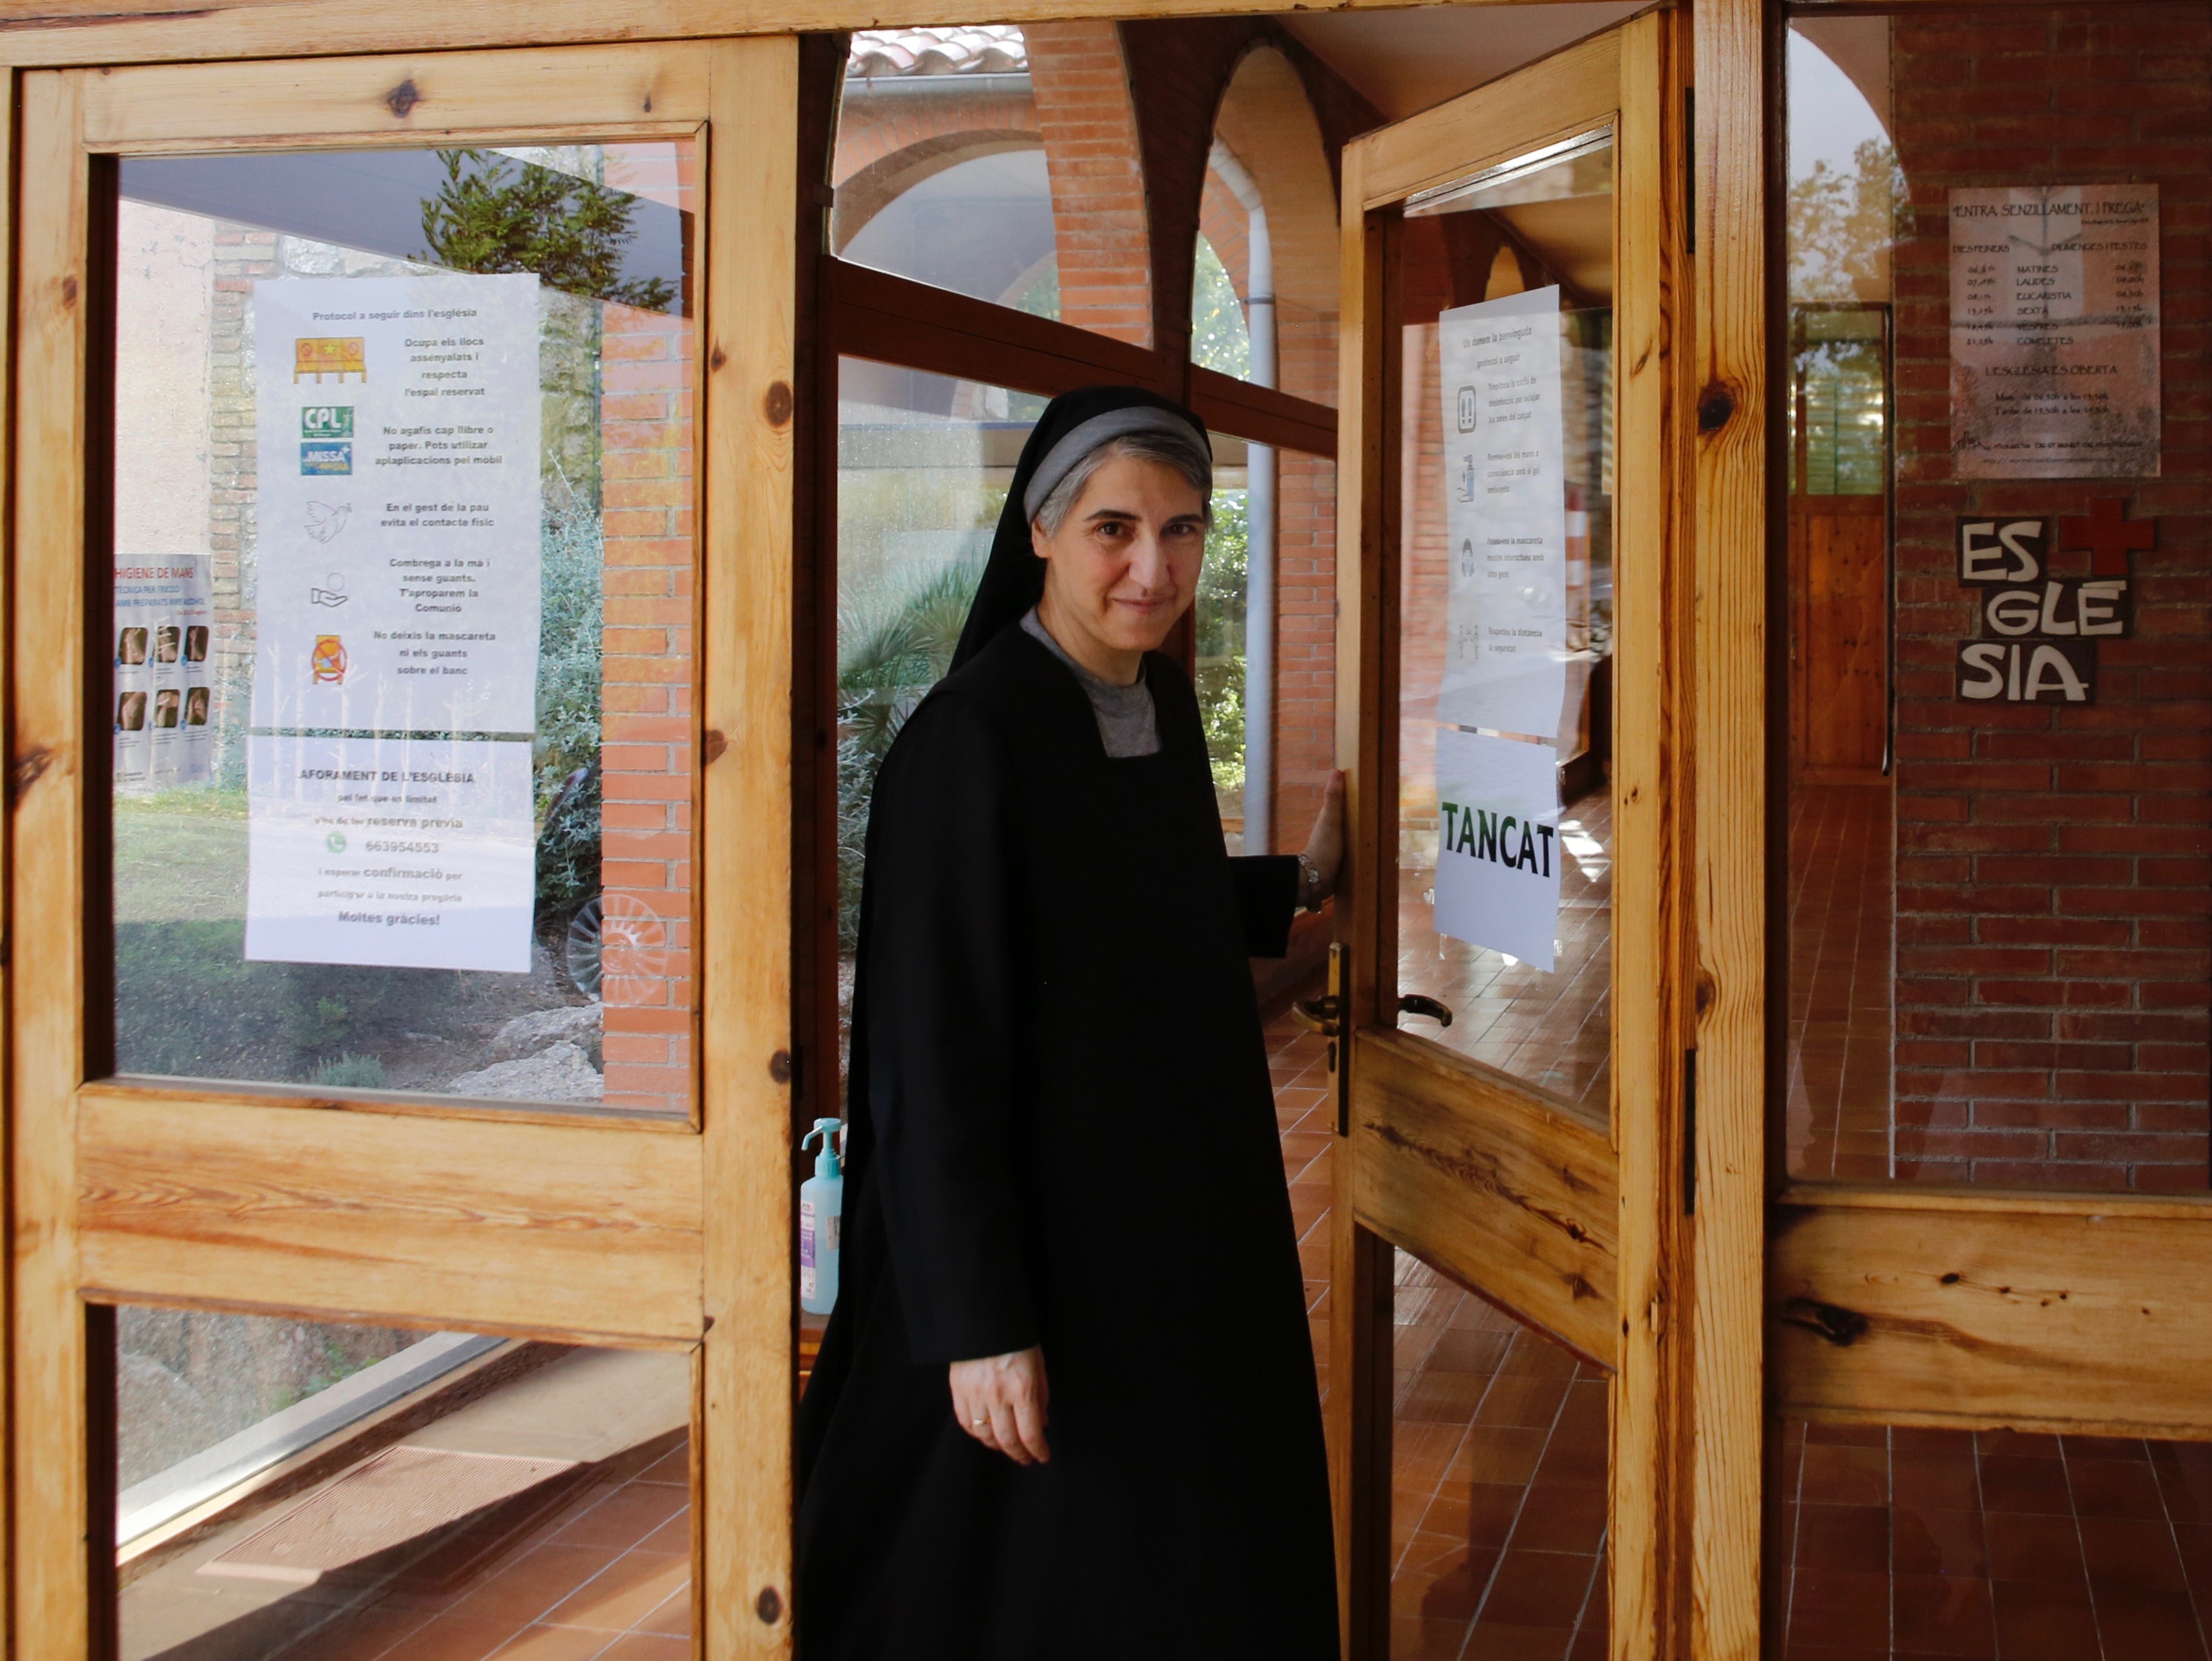 Her vocal opposition to the church’s stance on abortion and women’s ordination has earned her the moniker of Europe’s most radical nun